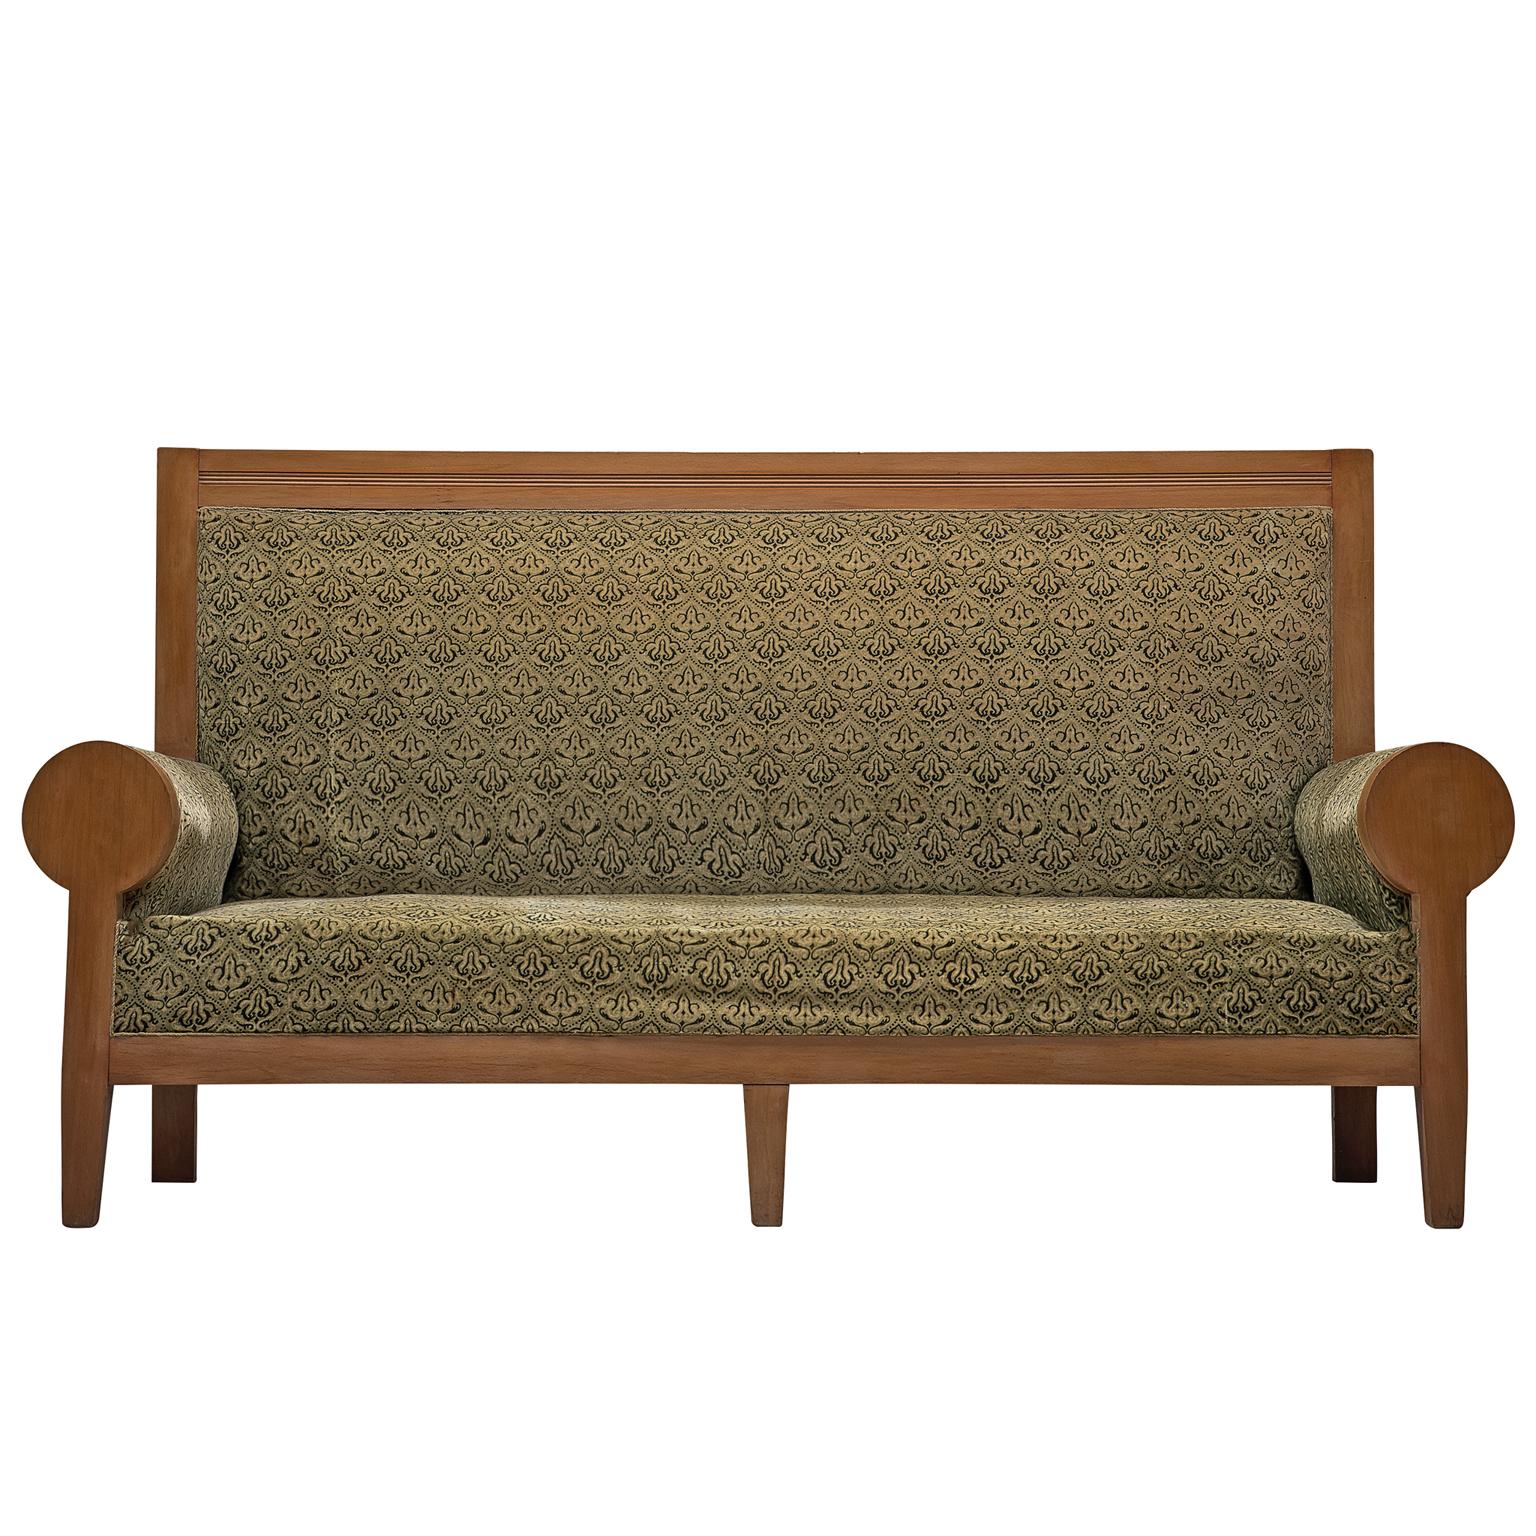 High Back Art Deco Sofa in Green Fabric Upholstery